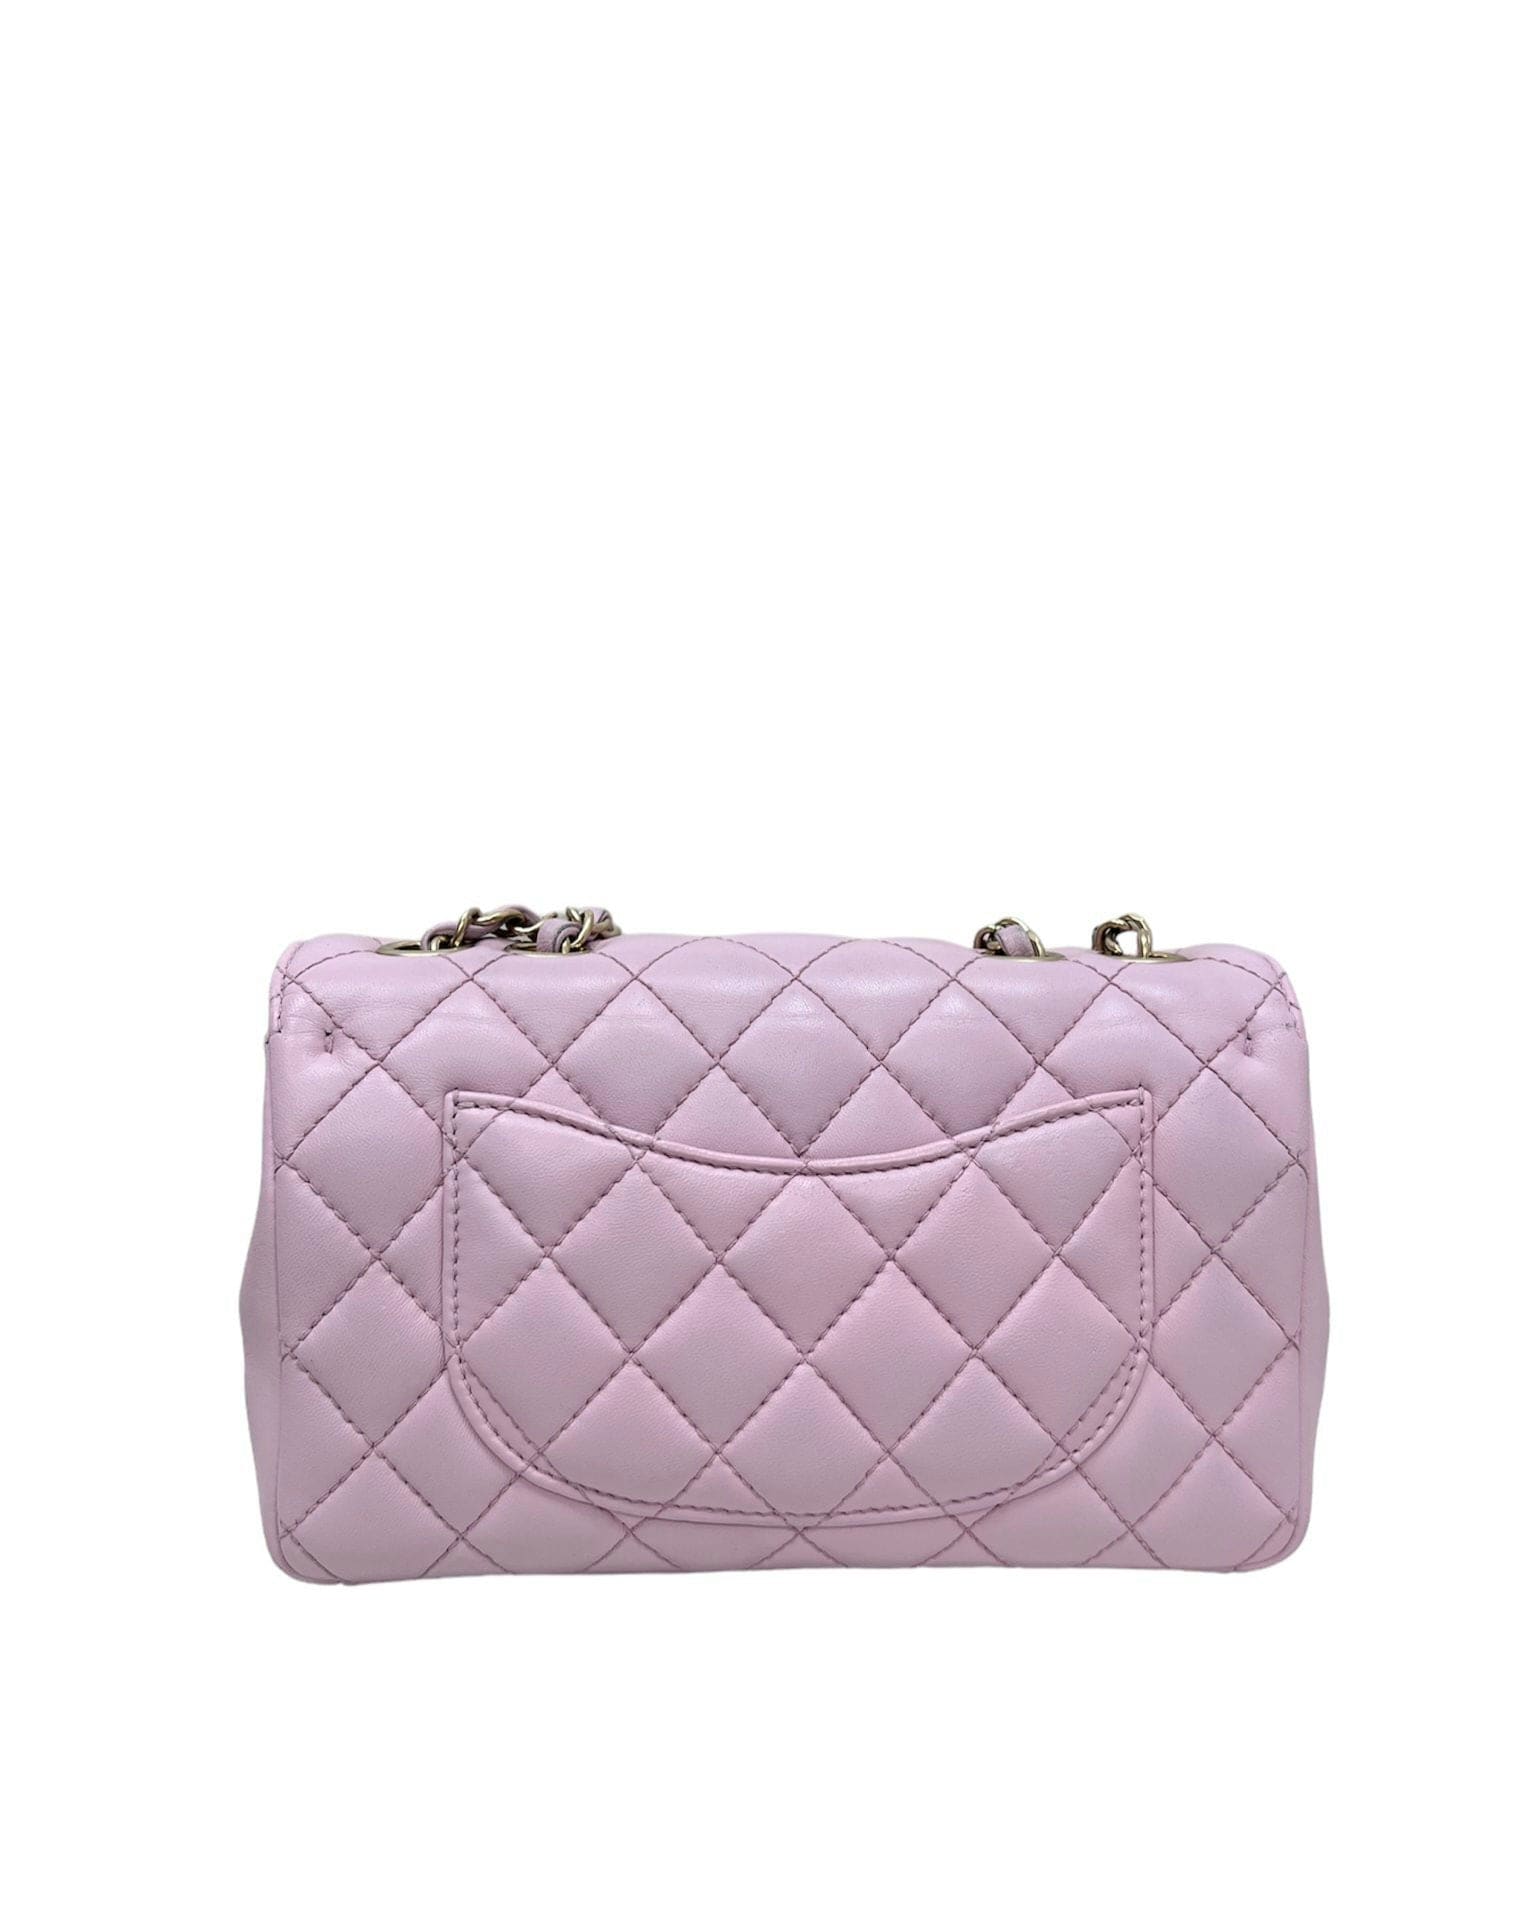 Chanel Chanel Mademoiselle Chic Flap Small SYC1027